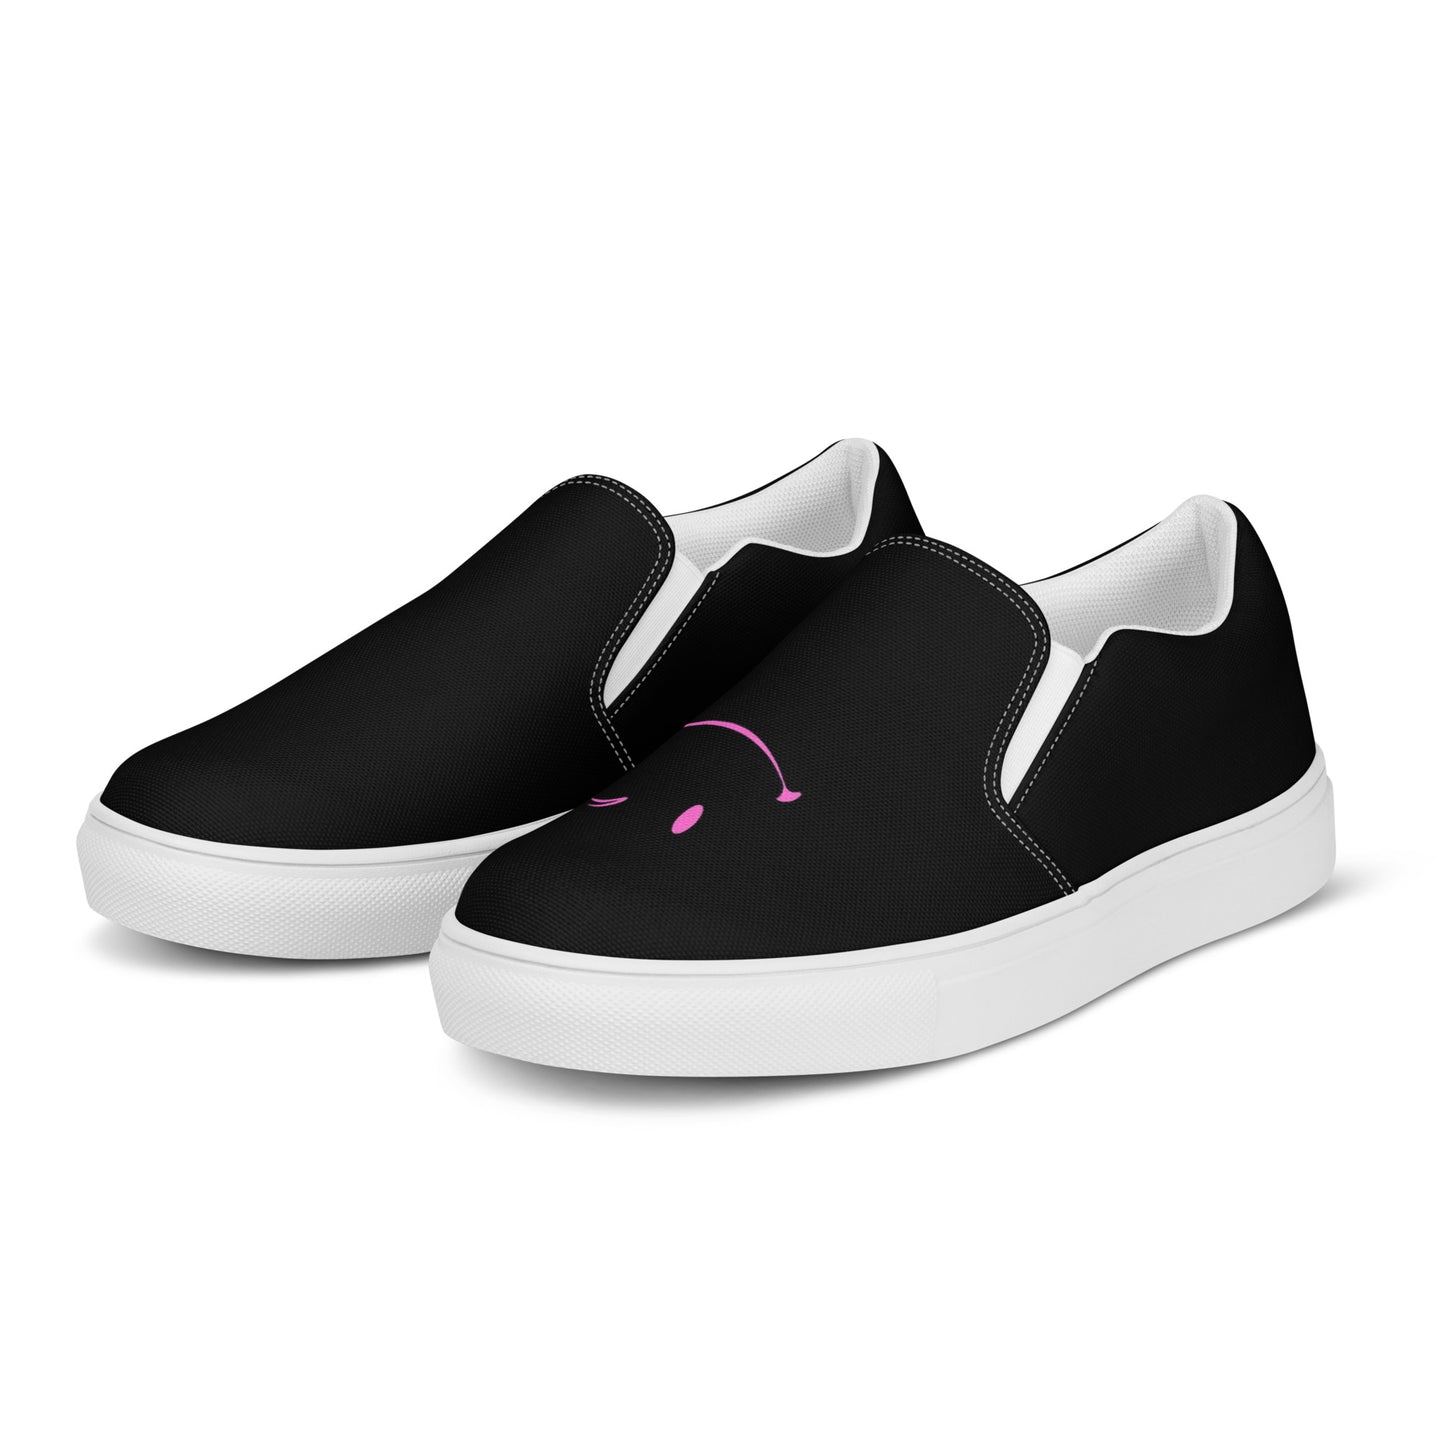 CB Smiley Slip-On Quality Canvas Shoes